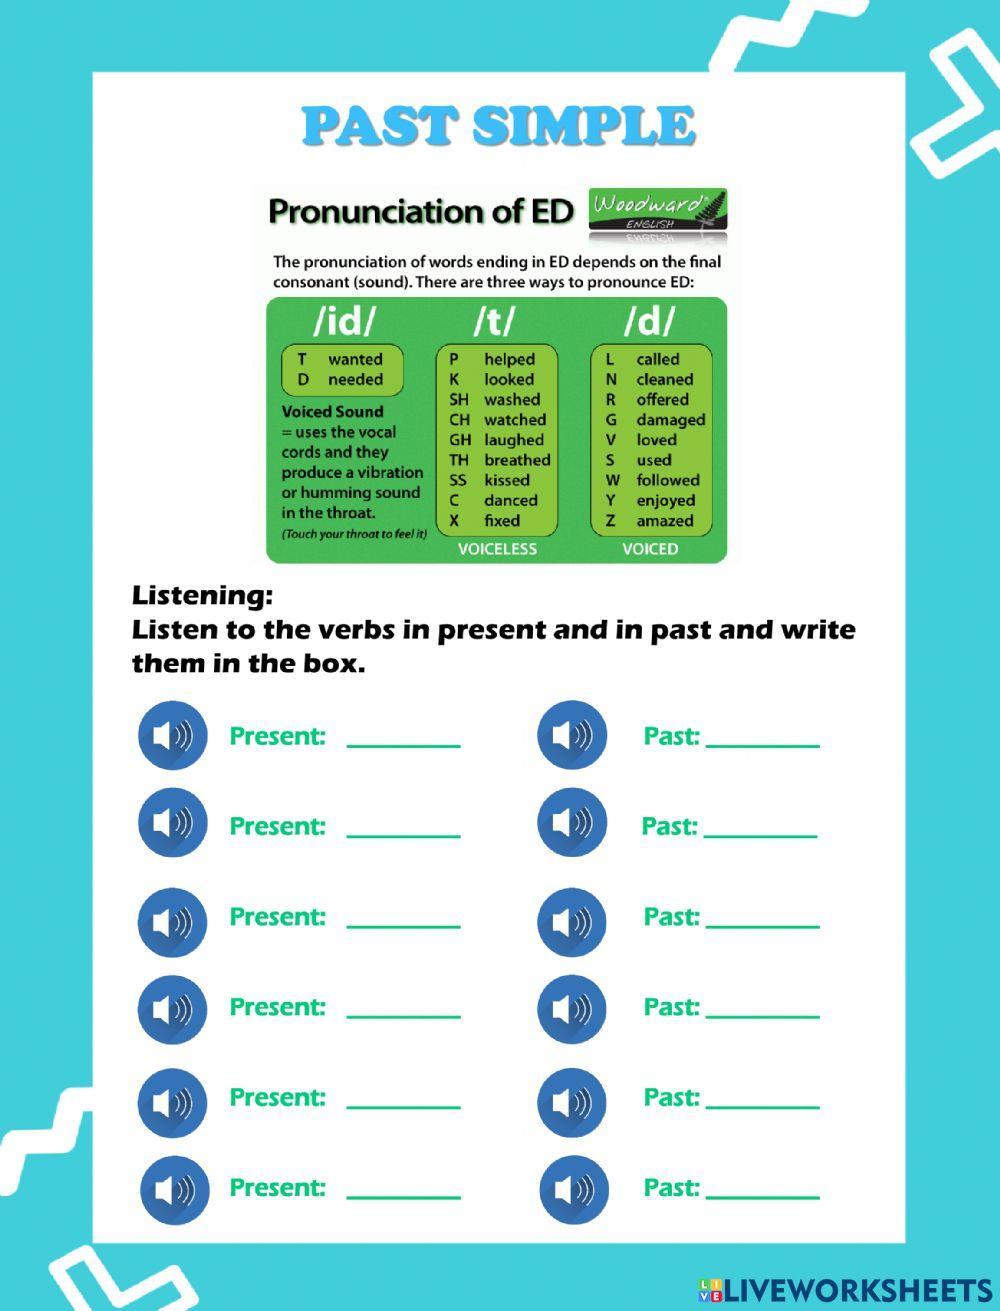 Past Simple - pronunciation, dictation and speaking